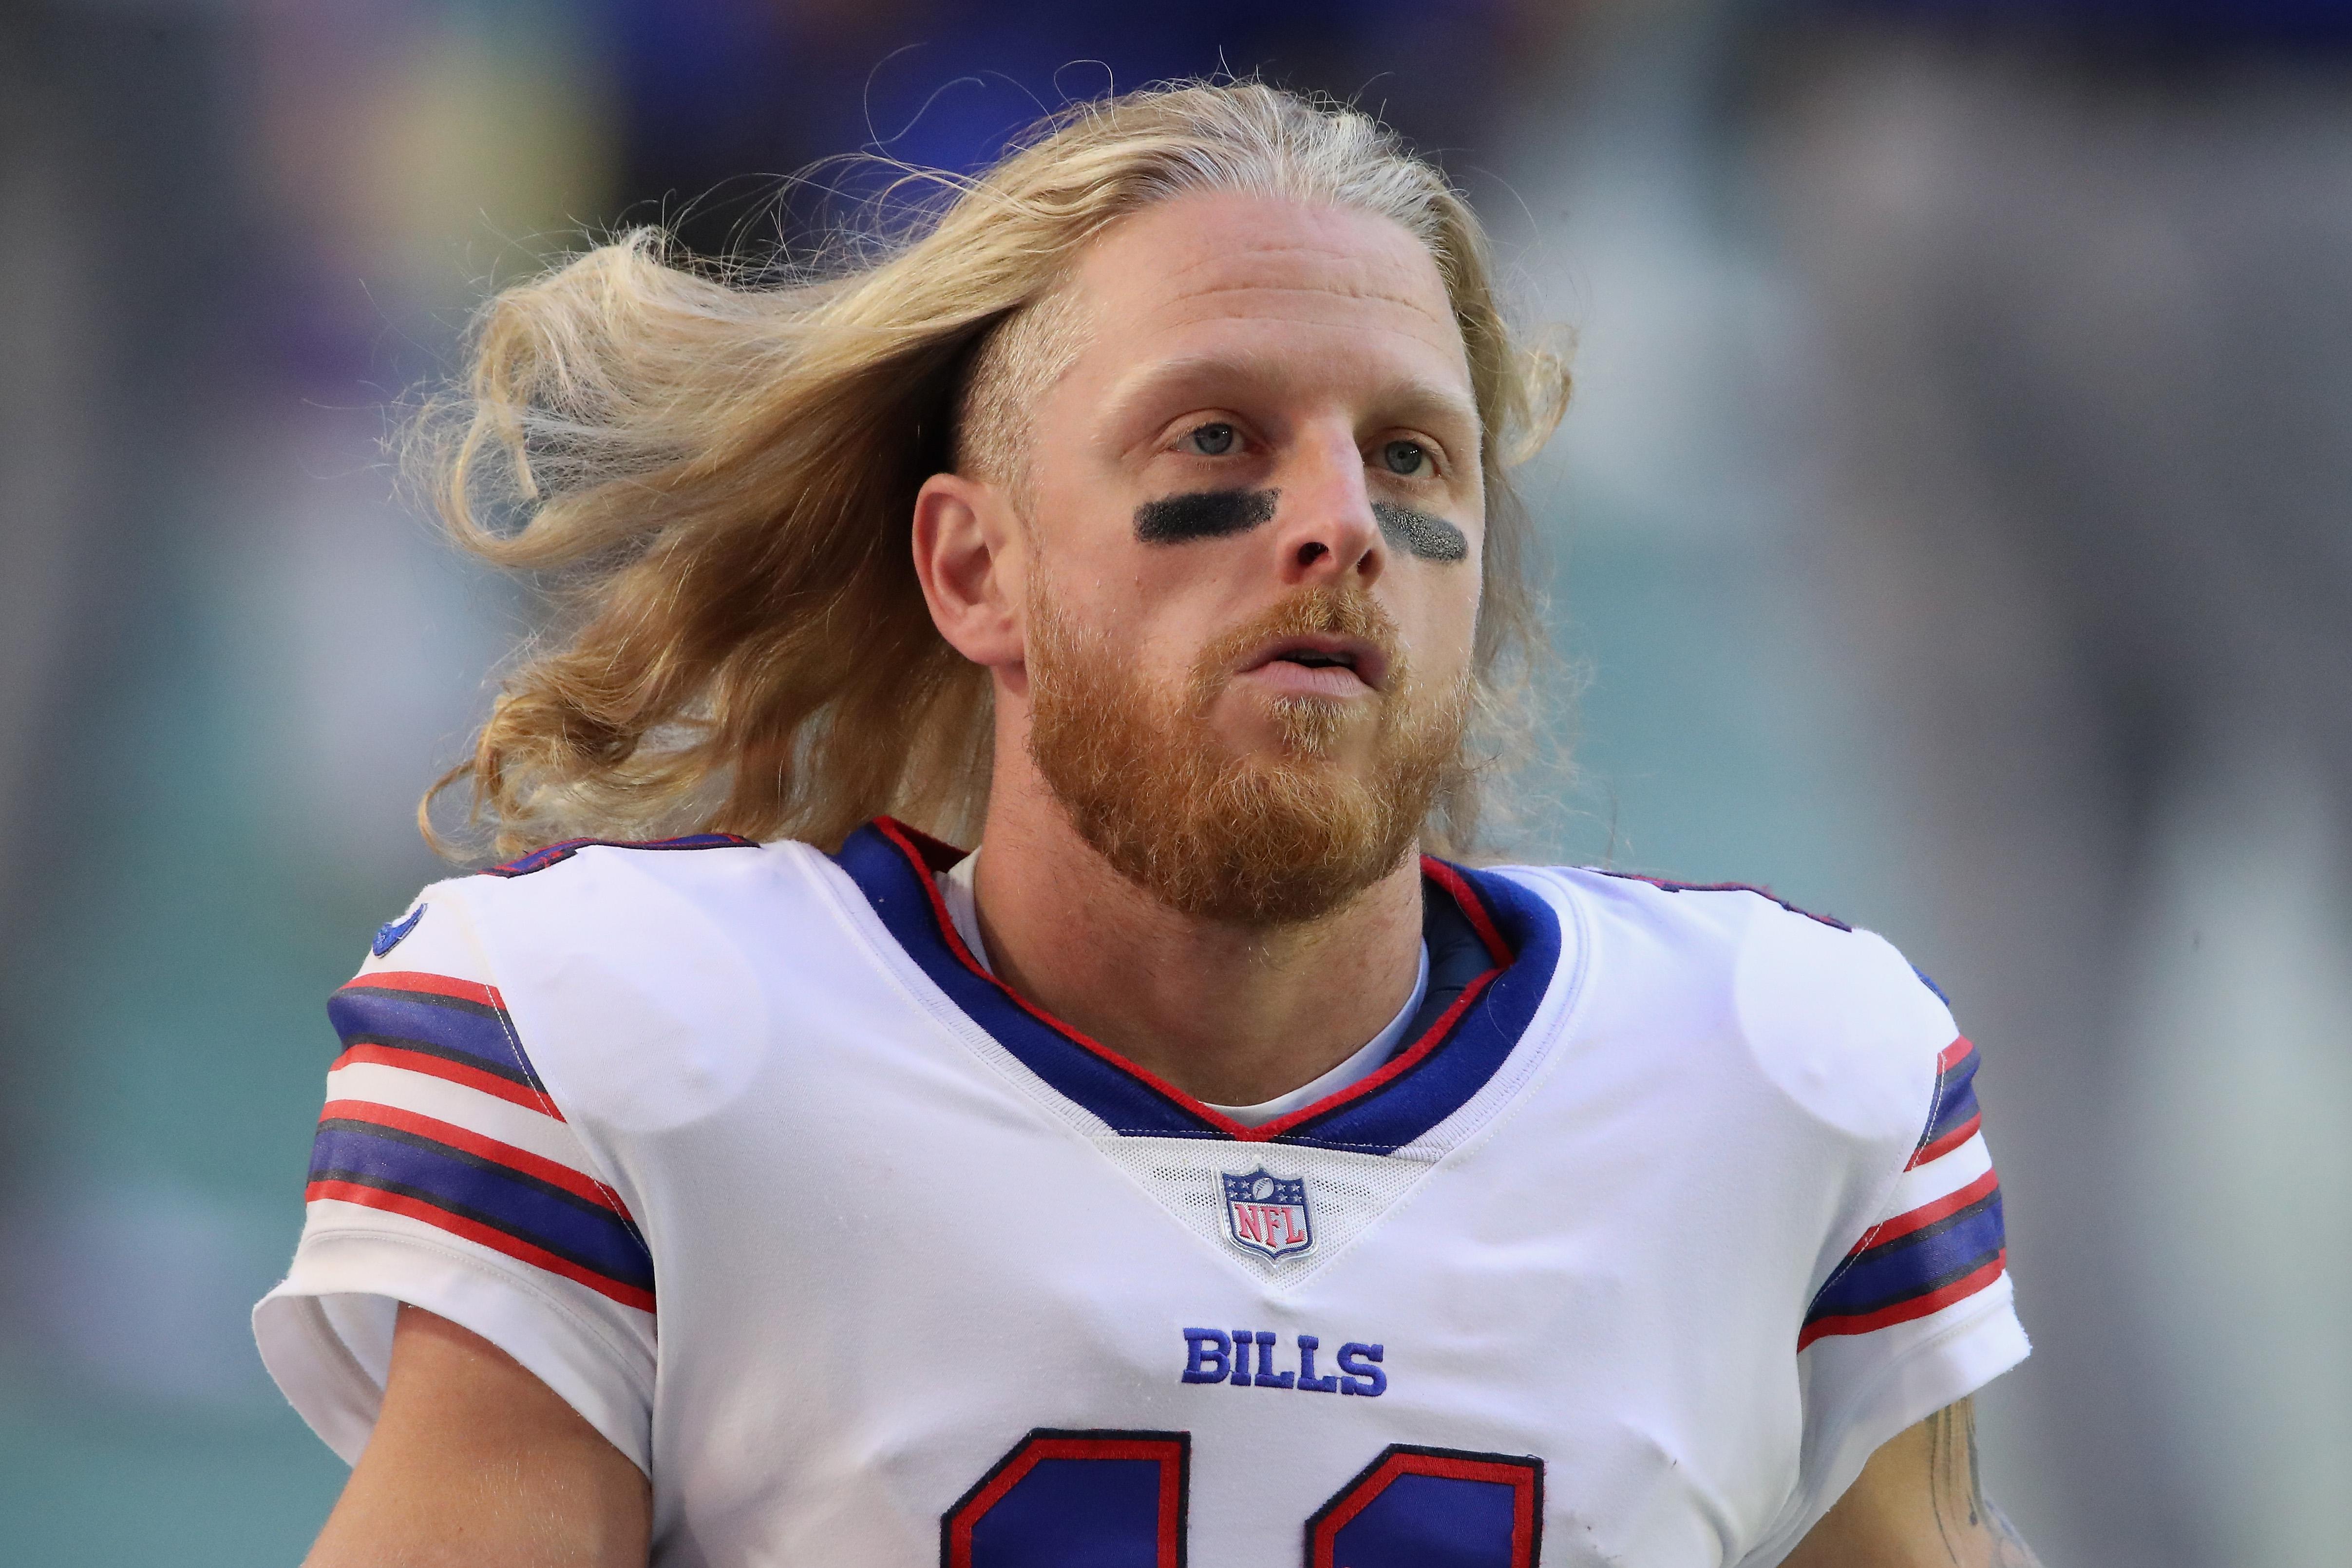 Wide receiver Cole Beasley #11 of the Buffalo Bills during the NFL game against the Arizona Cardinals at State Farm Stadium on November 15, 2020 in Glendale, Arizona.